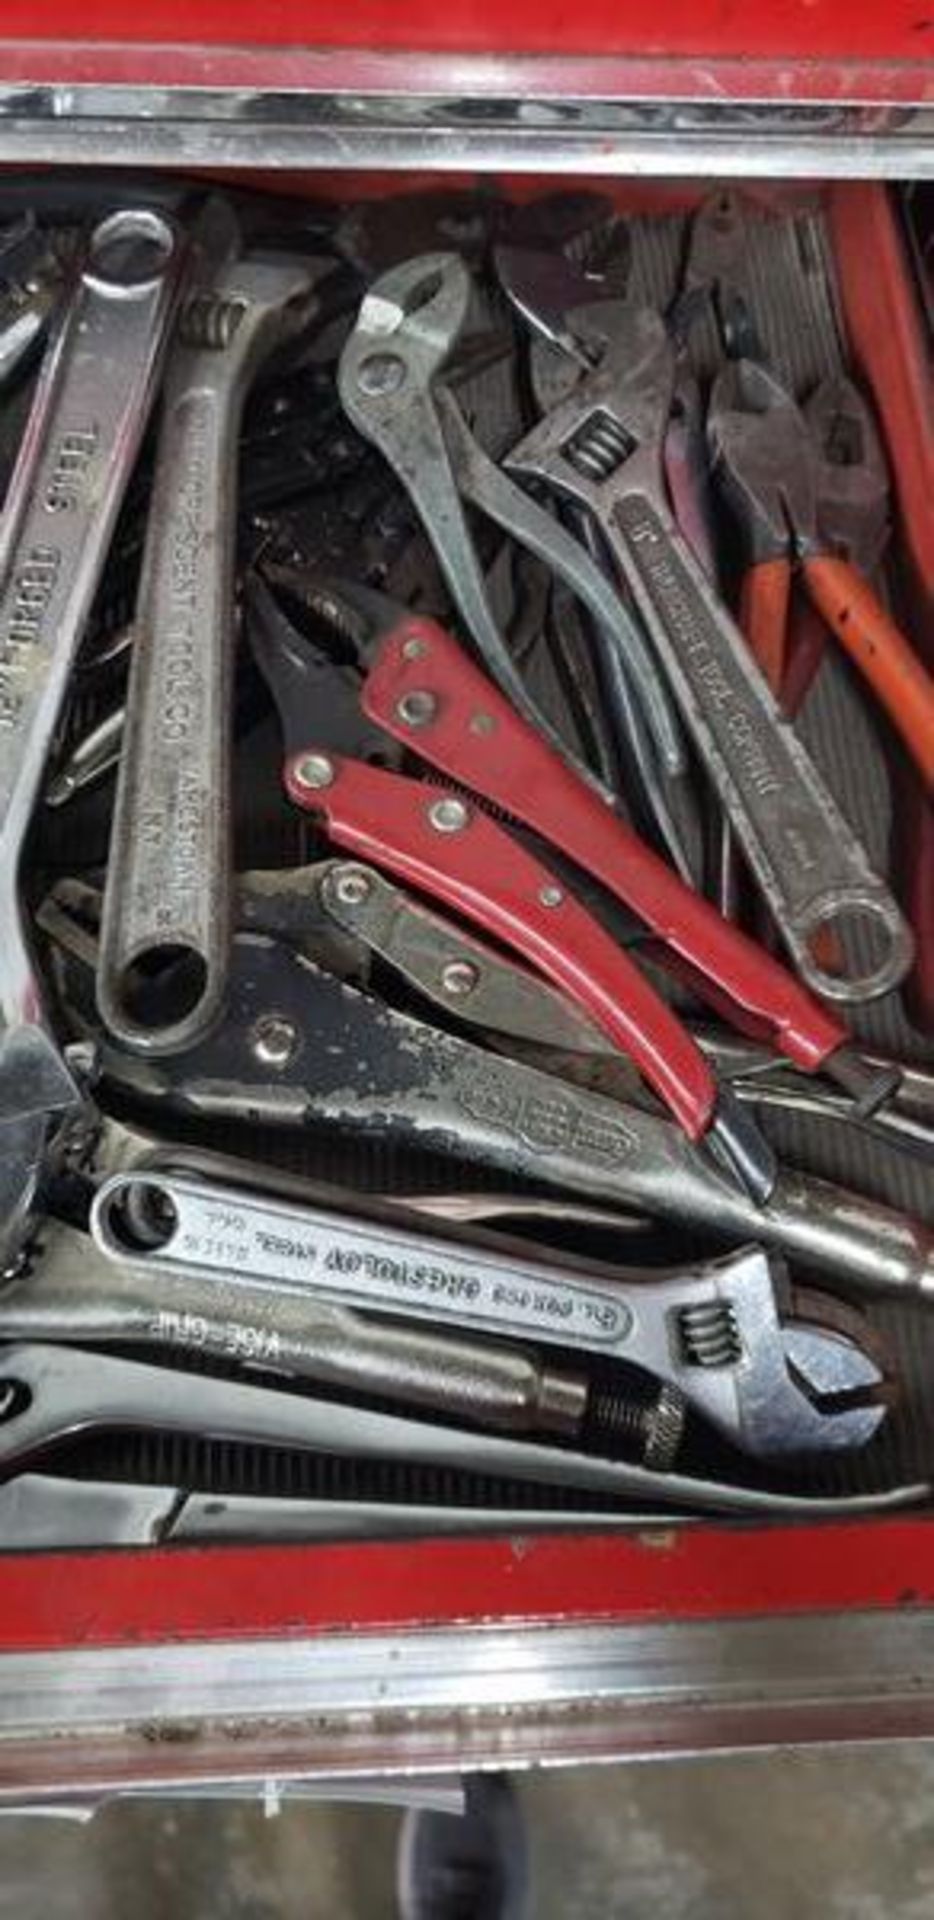 ASSORTED PLIERS, WRENCHES, VICE GRIPS AND OTHER HAND TOOLS - Image 3 of 3